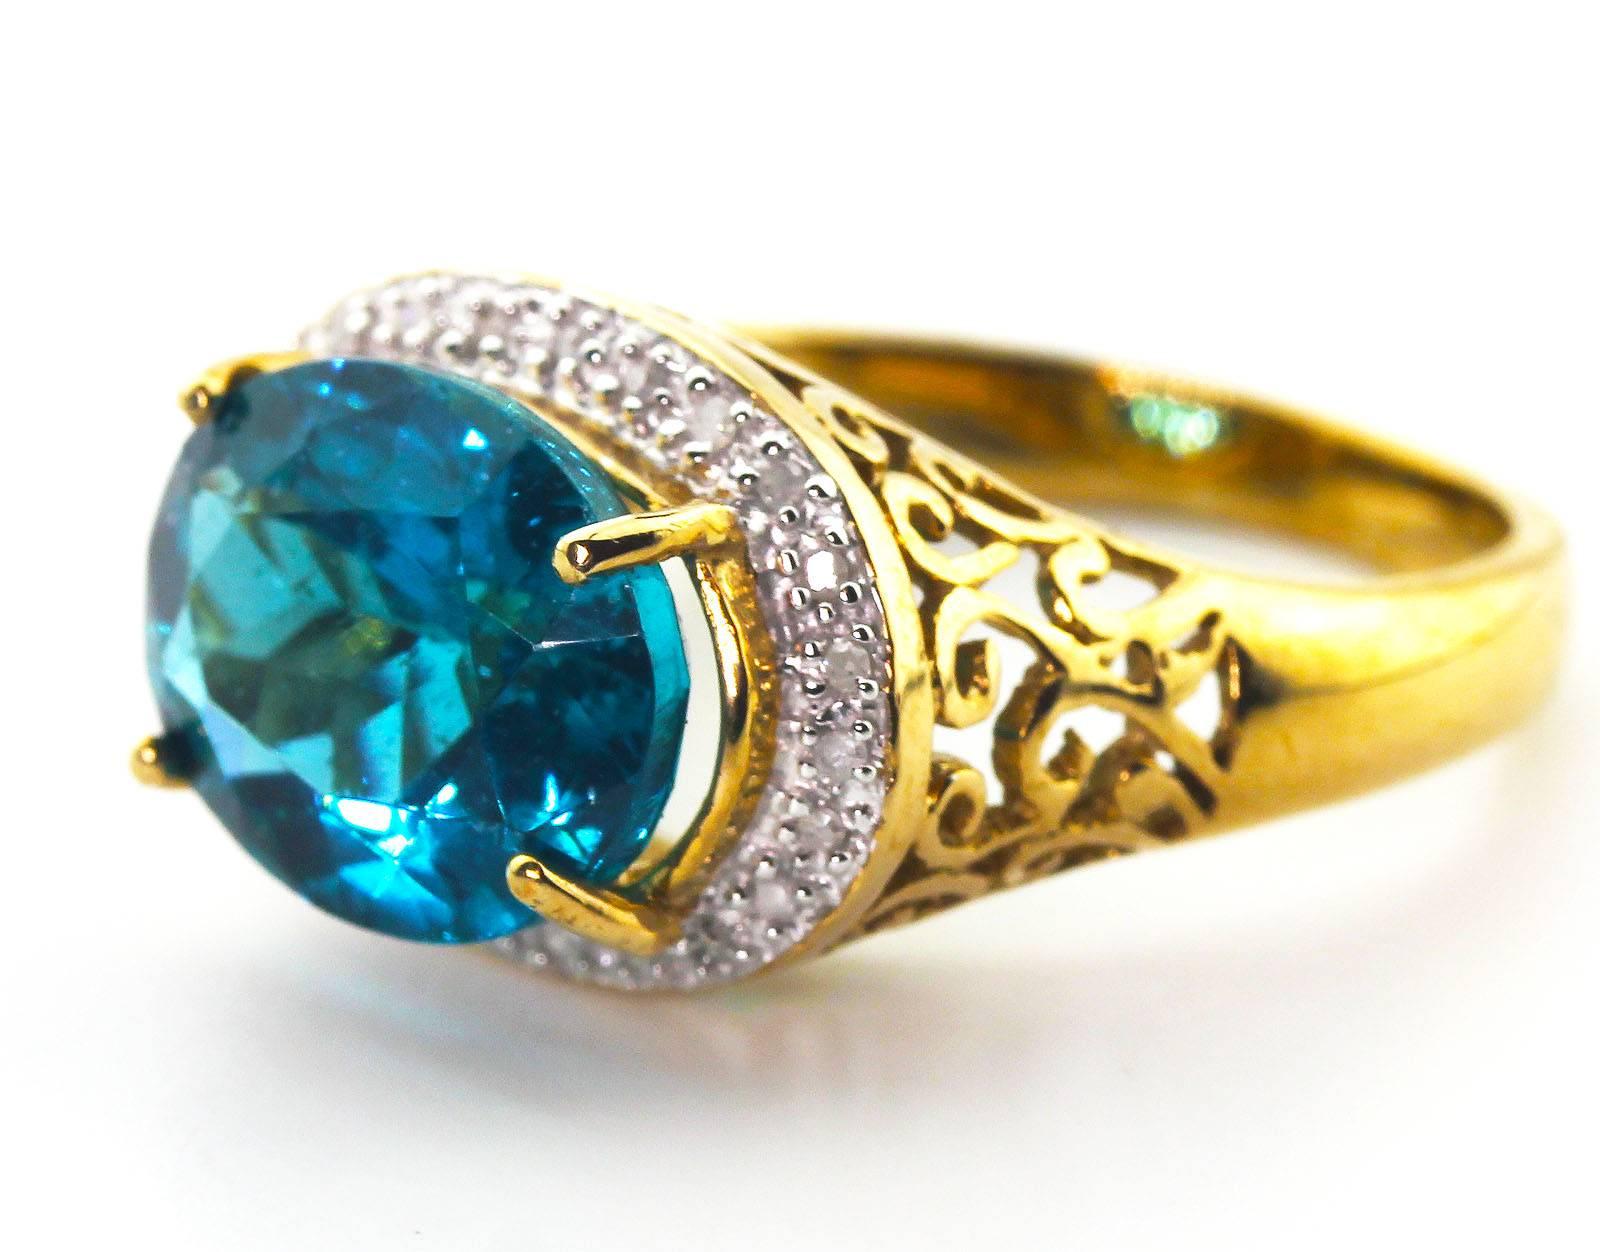 This flawless glittering 5.2 Carat unique natural blue Apatite from Madagascar is adorned with tiny little sparkling diamonds set in 10 KT yellow gold ring.  The Apatite is 12 mm x 10 mm and the ring is a size 7.5 sizable.  